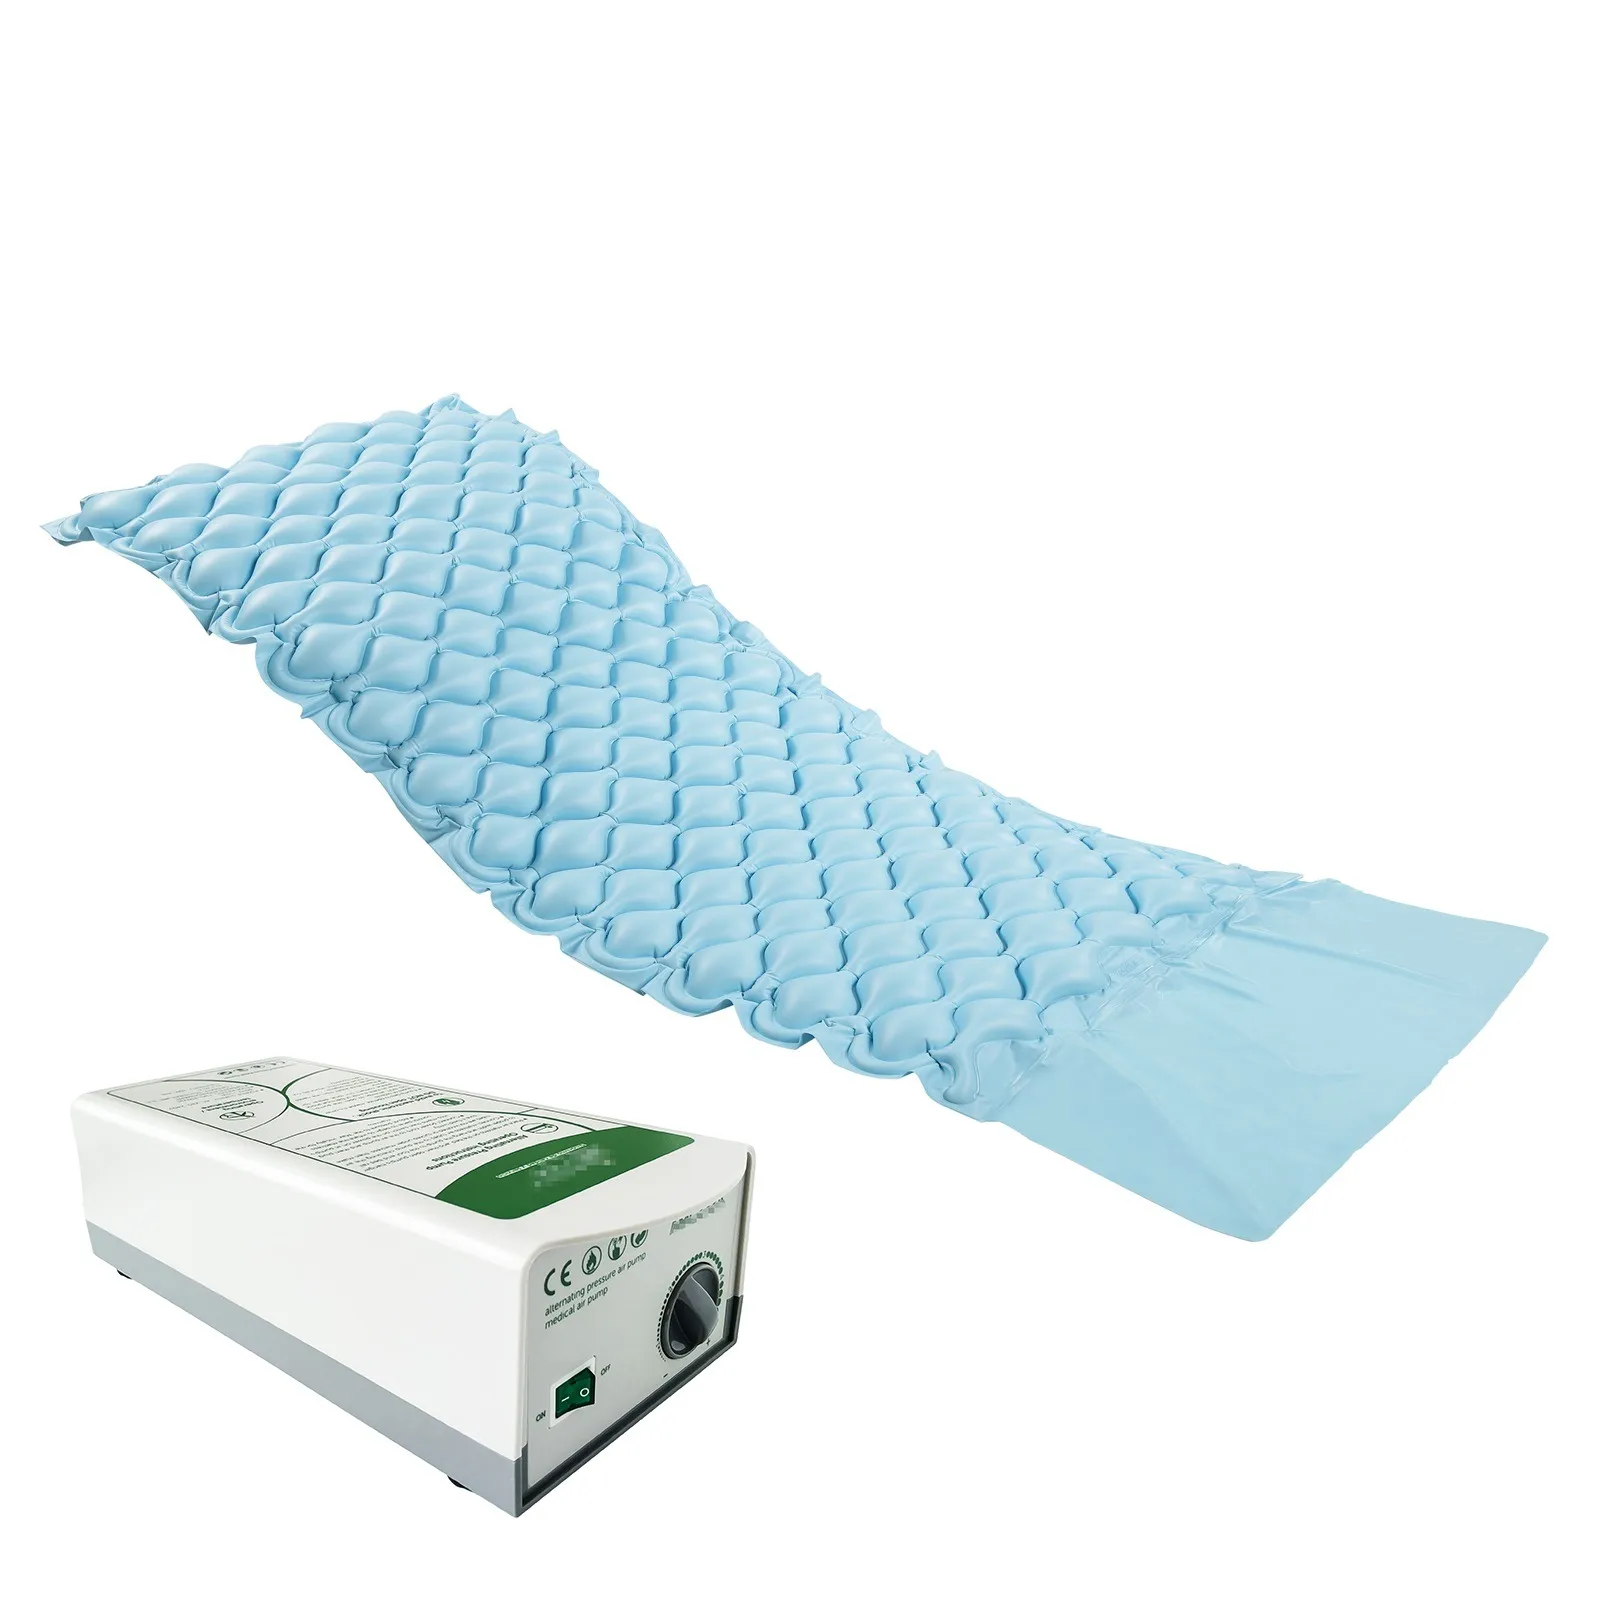 Hudson - From: 5725RG80CA To: 5725RG84CA  Pressure Eez Safety Mat Therapeutic Mattress